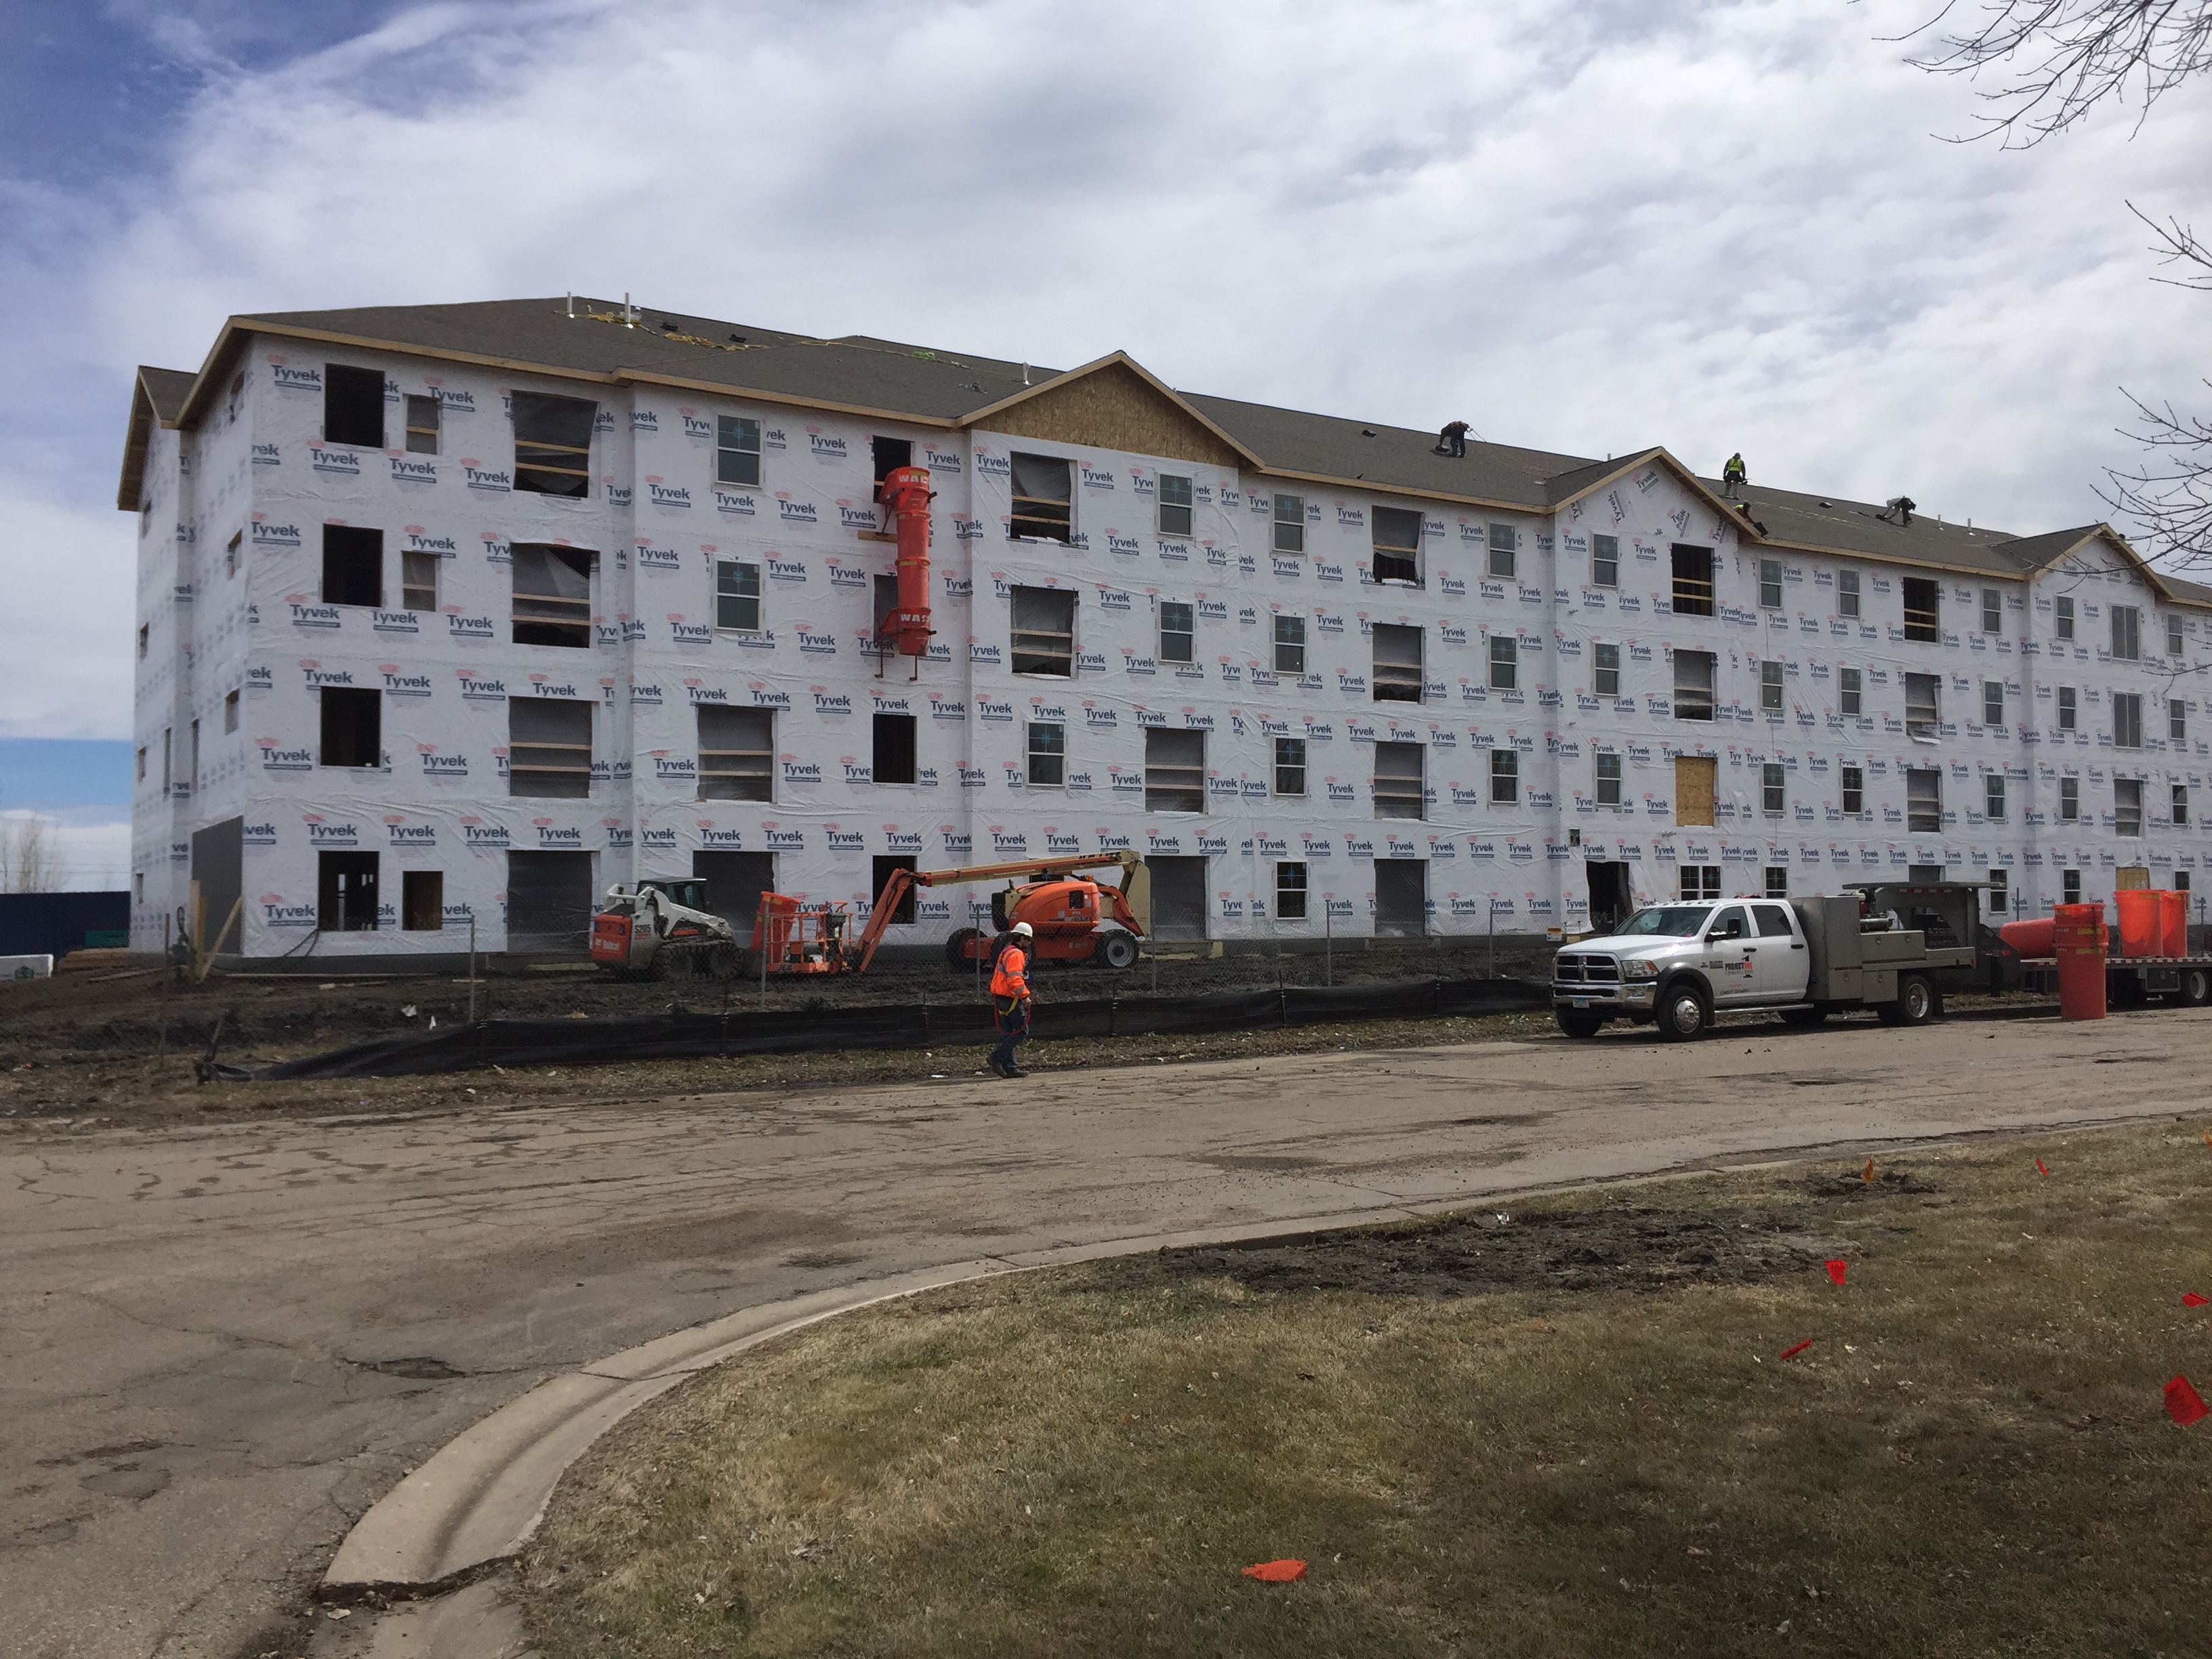 Housing Project – 15th Street Flats Rising (and shining!)